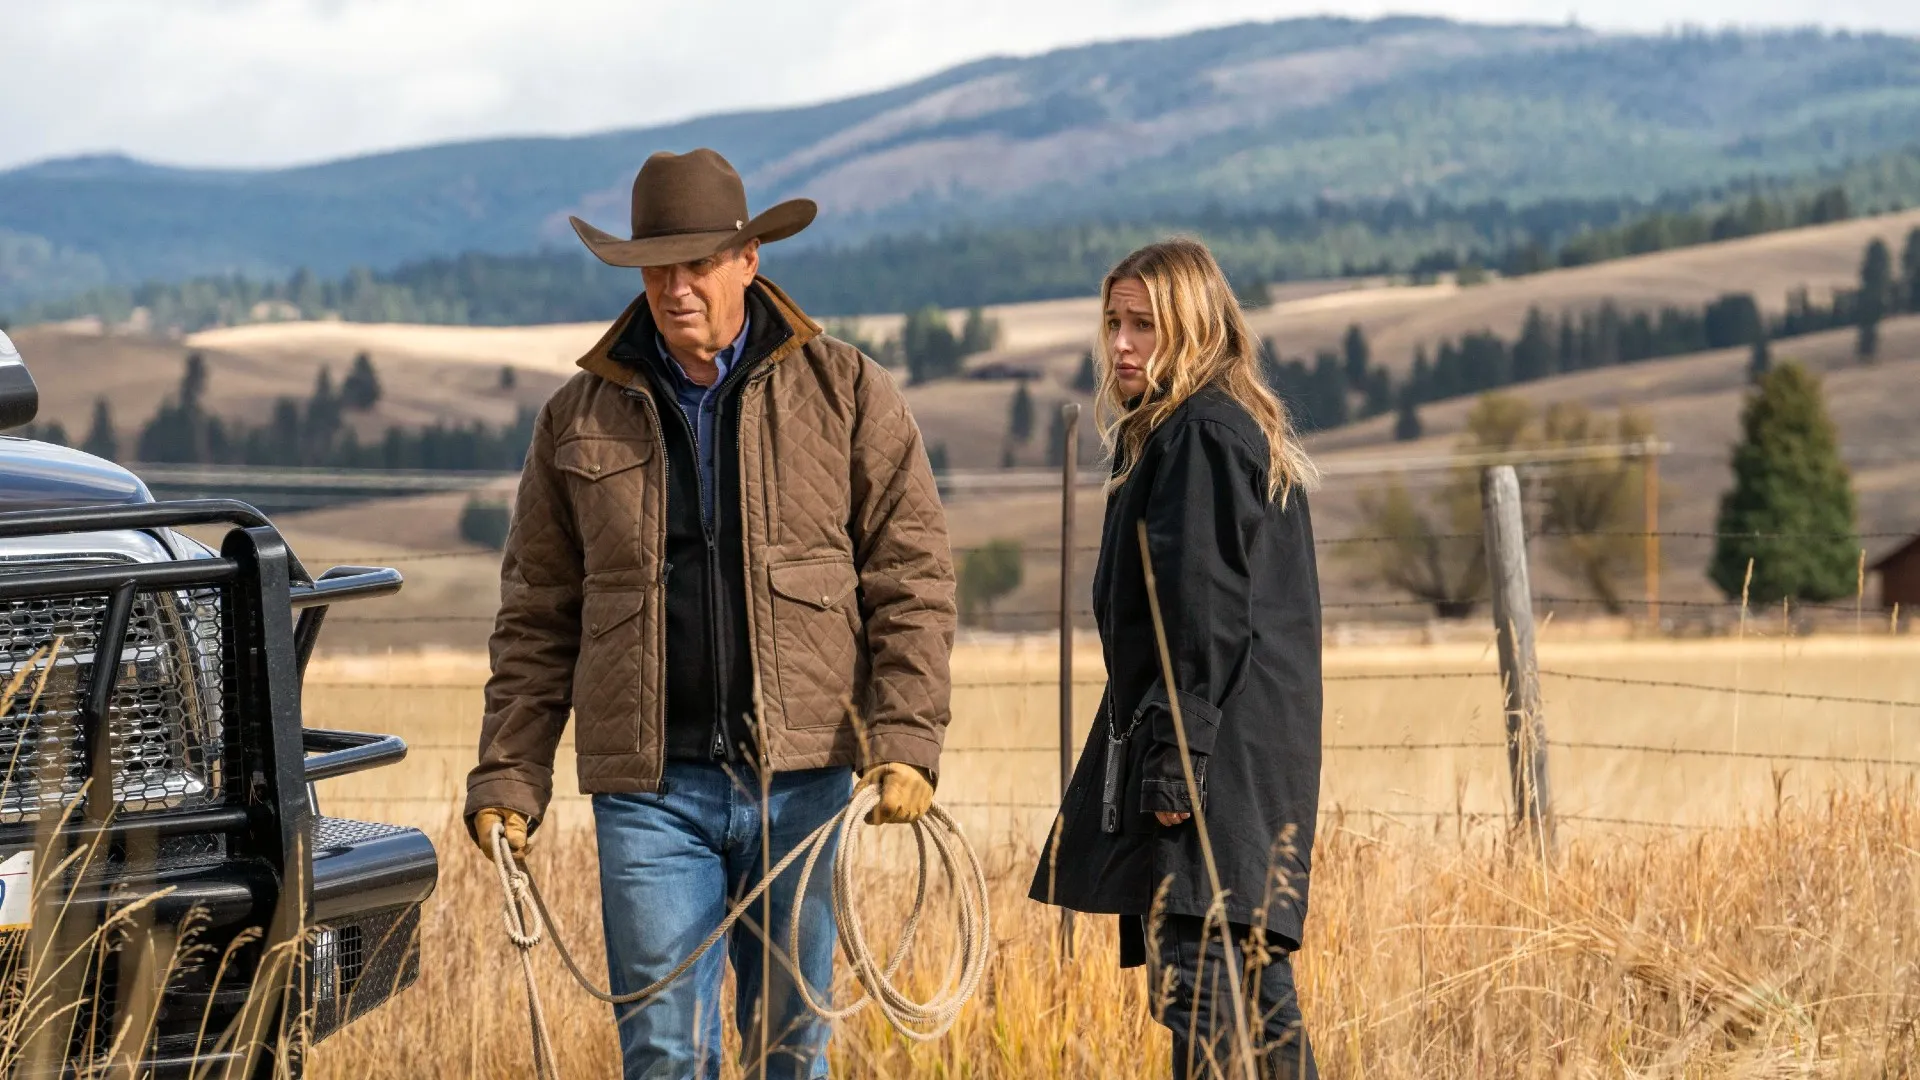 beth dutton news, episode news, horizon kevin costner where to watch, horizon movie, horizon movie 2023 release date, how to watch yellowstone season 1, how to watch yellowstone season 5 for free, how to watch yellowstone season 6, is kelly reilly married in real life, Is Rip and Beth leaving Yellowstone?, kelly reilly age, kelly reilly height, kelly reilly husband, kelly reilly movies, kelly reilly net worth, kelly reilly peaky blinders, kevin costner horizon release date, kevin costner horizon trailer, kevin costner new movie 2023, kevin costner new movie on netflix, kevin costner western movies, stream yellowstone season 5 part 2, taylor sheridan, taylor sheridan news, watch yellowstone season 5 online free dailymotion, What happened to Beth Dutton?, when does yellowstone return 2023, Who is Beth Dutton in a relationship with?, yellowstone - season 1 news, yellowstone season 5 episode 1 full episode free, yellowstone season 5 part 1 episodes, Yellowstone season 5 part 1 full episodes, yellowstone season 5 part 1 how many episodes, yellowstone season 5 part 1 release date, yellowstone season 5 part 1 streaming, Yellowstone season 5 part 1 streaming free, Yellowstone season 5 part 1 streaming release date, yellowstone season 5 part 1 trailer, yellowstone season 5 part 2, yellowstone season 5 part 2 episode 1, yellowstone season 5 part 2 episodes, yellowstone season 5 part 2 kevin costner, Yellowstone season 5 part 2 news cast, Yellowstone season 5 part 2 news episode 1, Yellowstone season 5 part 2 news release date, Yellowstone season 5 part 2 news spoilers, yellowstone season 5 part 2 release date, yellowstone season 5 part 2 release date 2023, yellowstone season 5 part 2 streaming, yellowstone season 5 part 2 tonight, yellowstone season 5 part 2 trailer, Yellowstone season 5 part 2 trailer leak, Yellowstone season 5 part 2 trailer netflix, Yellowstone season 5 part 2 trailer release date, Yellowstone season 5 part 2 trailer season 1, yellowstone season 5 part 2 trailer: jamie finally kills beth, yellowstone season 5 release date, yellowstone season 5 streaming on peacock, yellowstone season 5 watch online, yellowstone season 6, yellowstone season 6 release date, बेथ डटन का क्या हुआ?